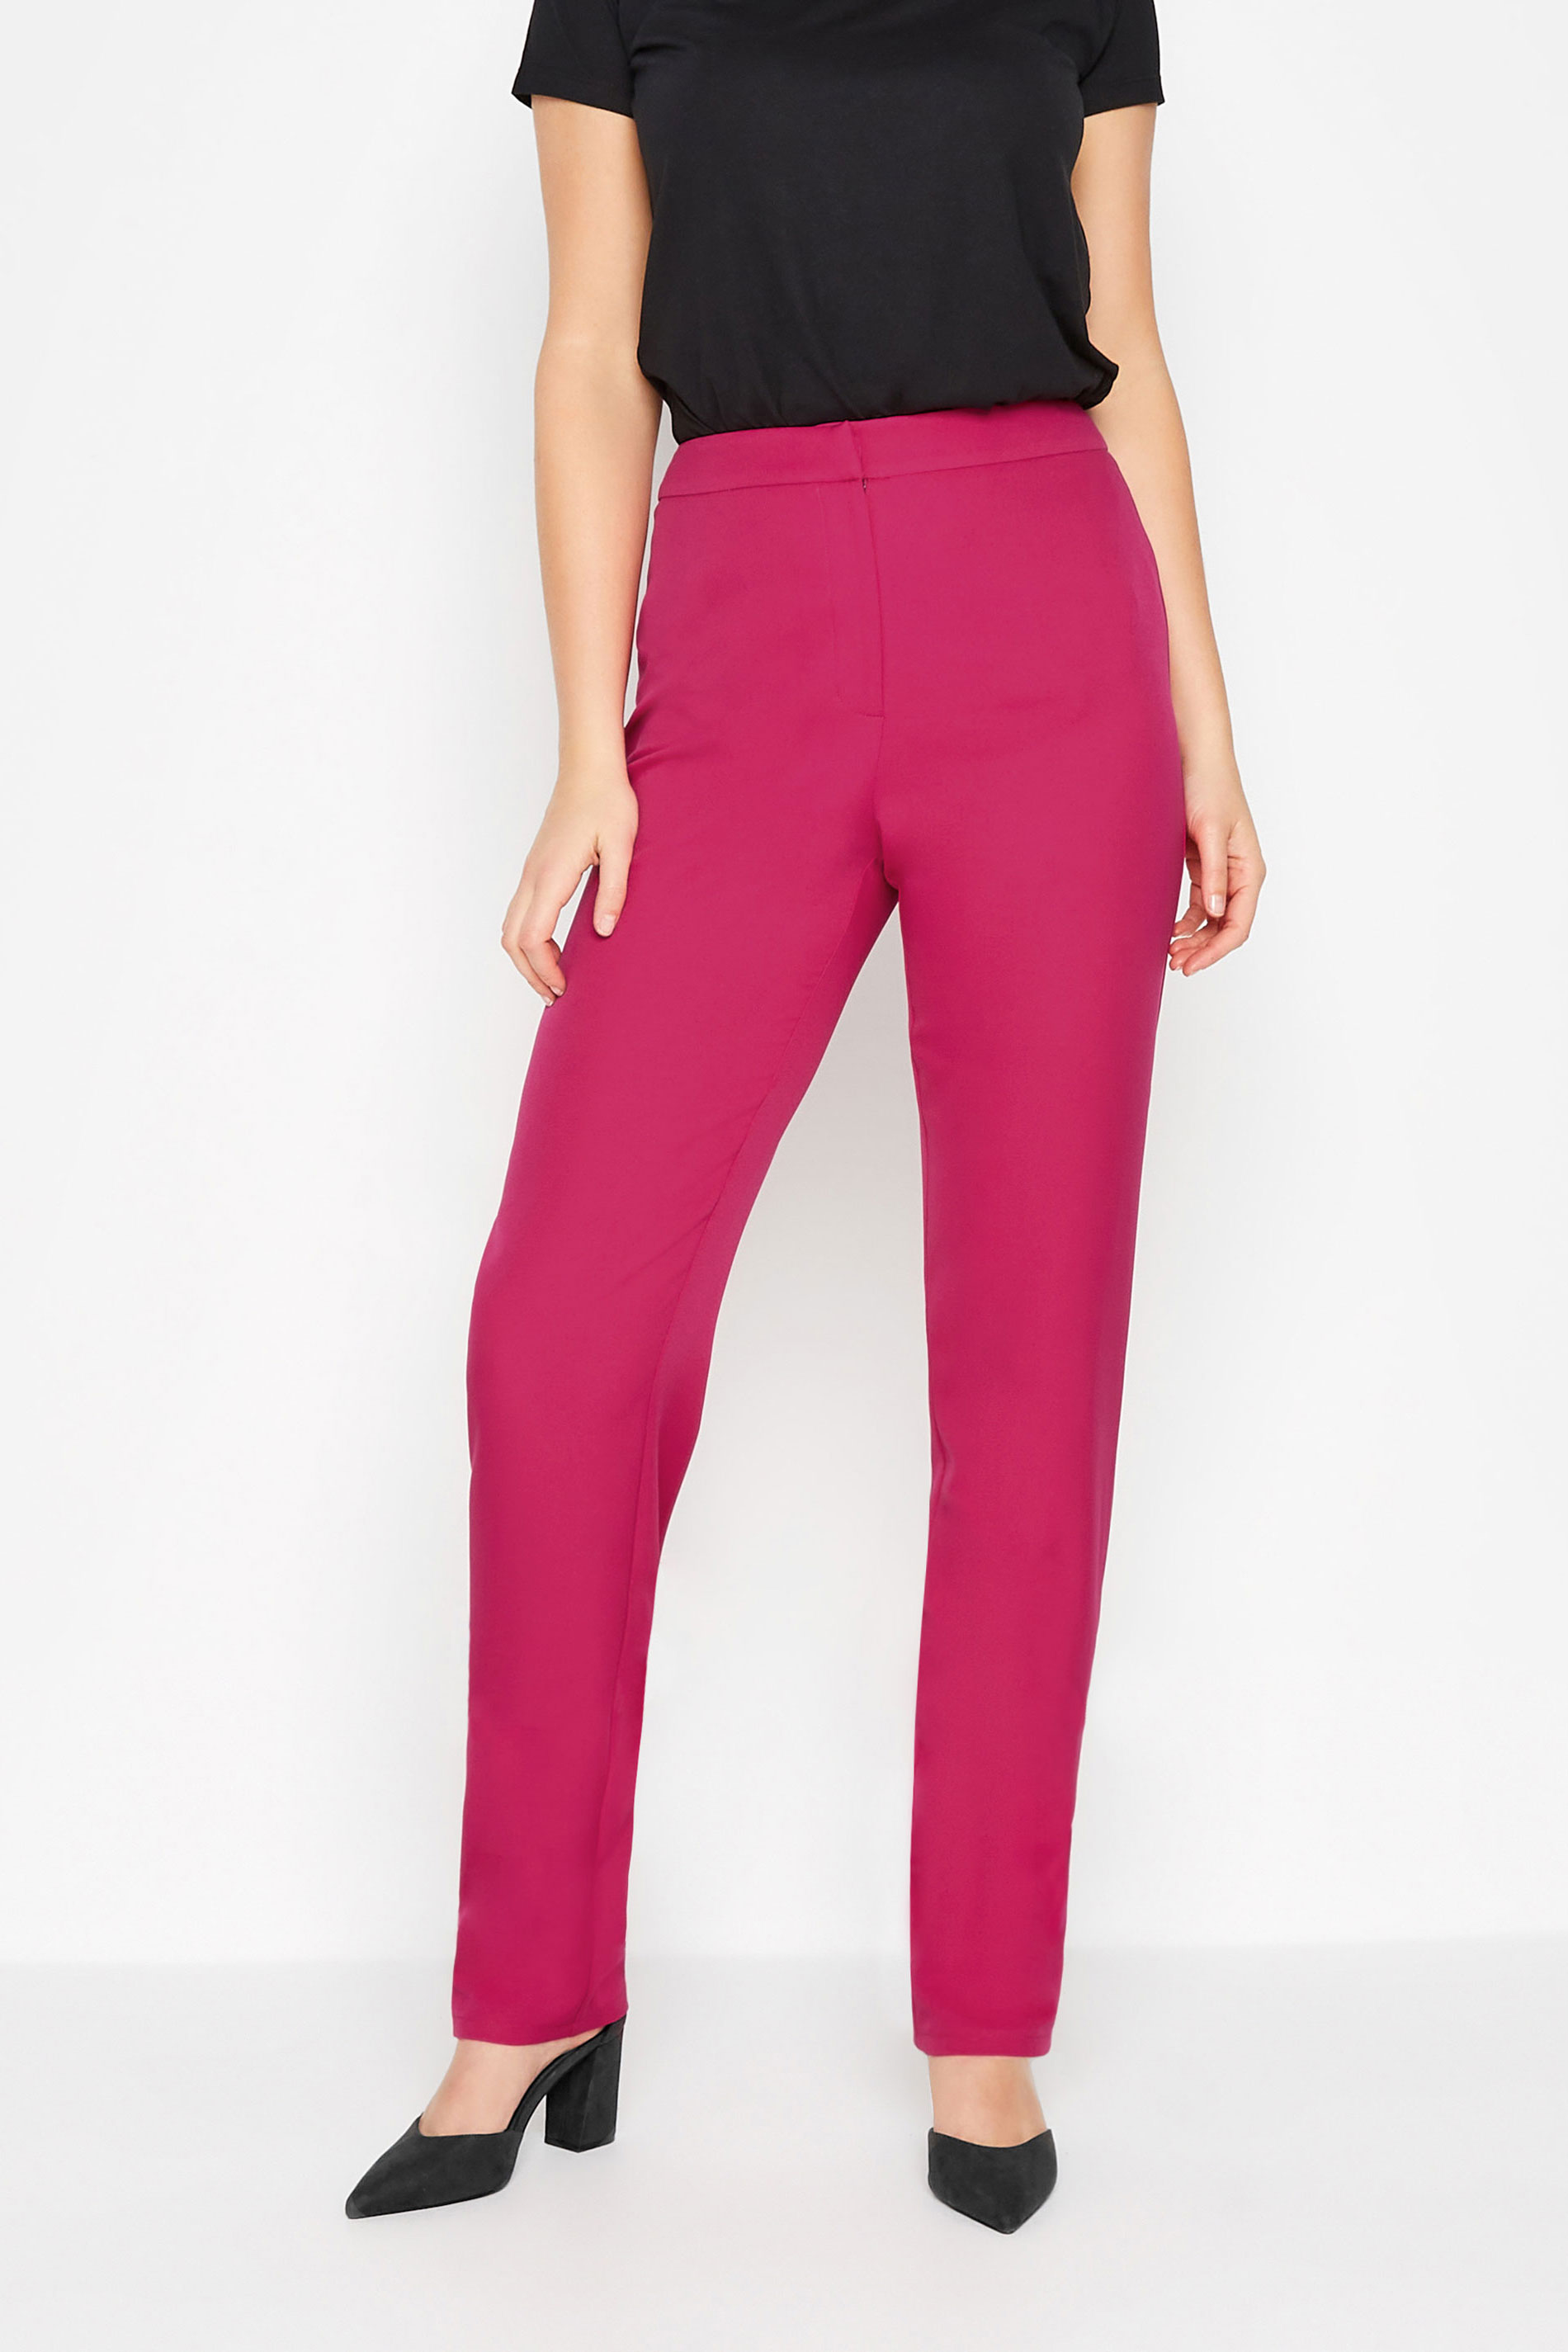 Yours wide leg linen look trousers in pink | ASOS